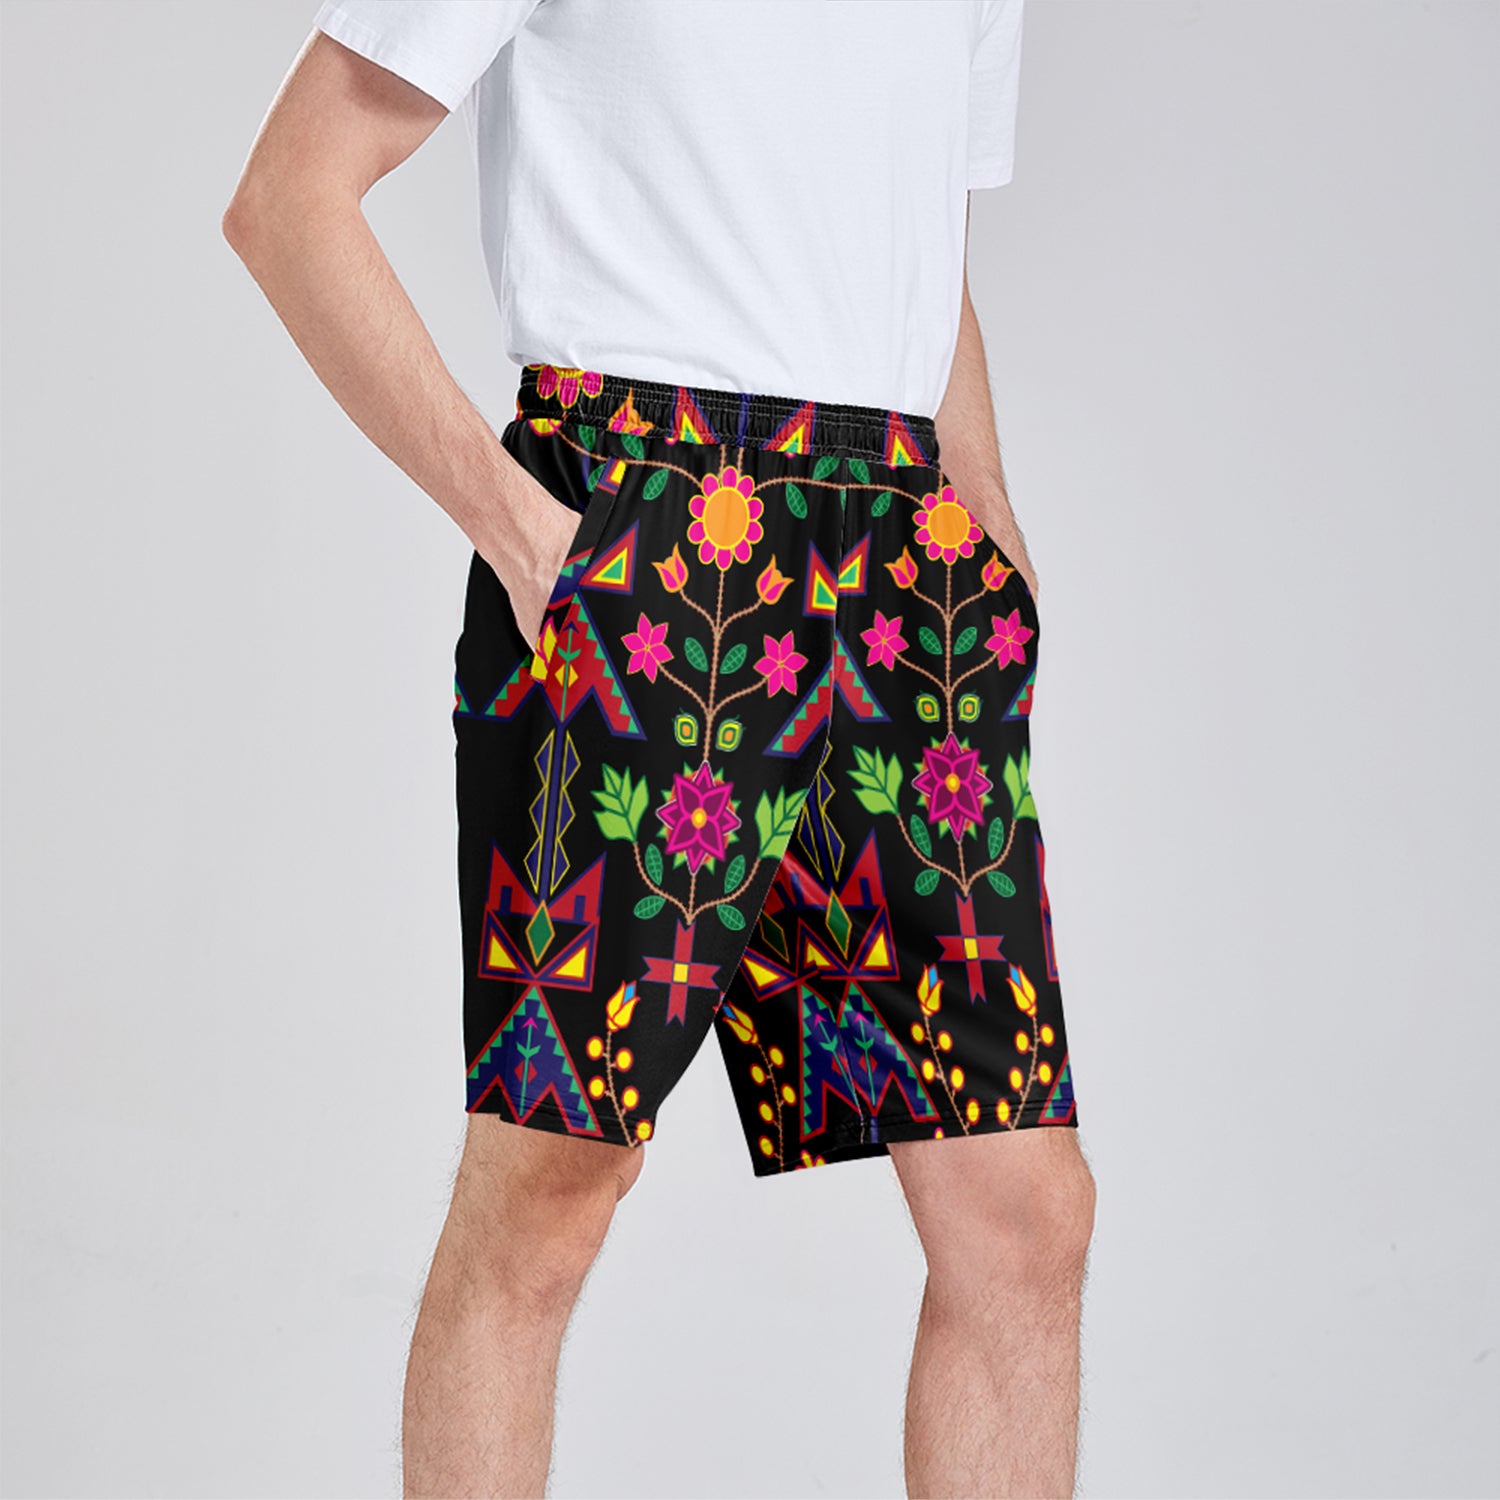 Geometric Floral Spring Black Athletic Shorts with Pockets